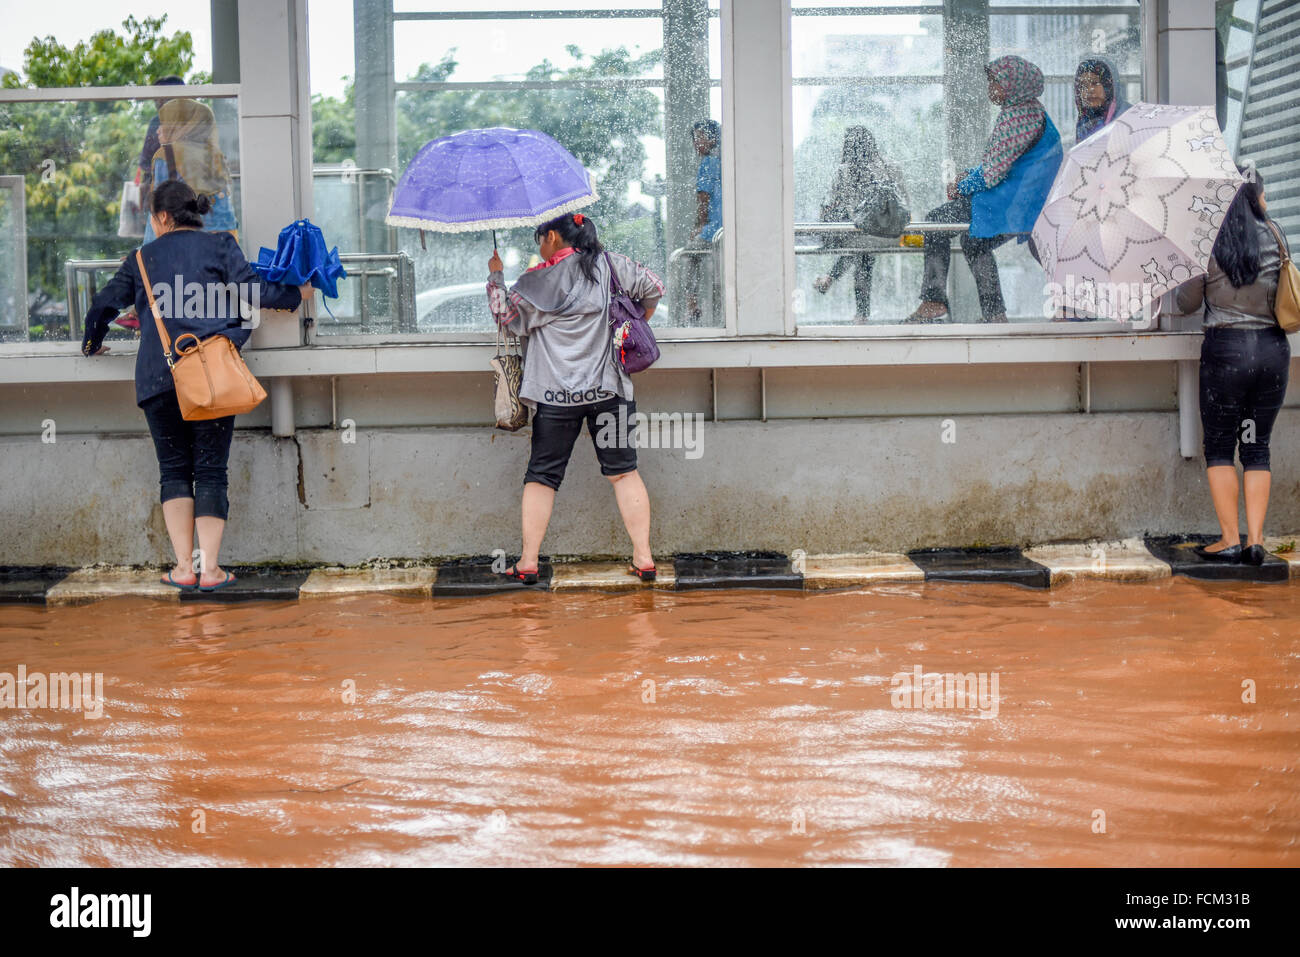 Pedestrians trying to avoid floodwater as they are walking, by hanging on the side of a Trans Jakarta bus station on Thamrin Street, Jakarta. Stock Photo